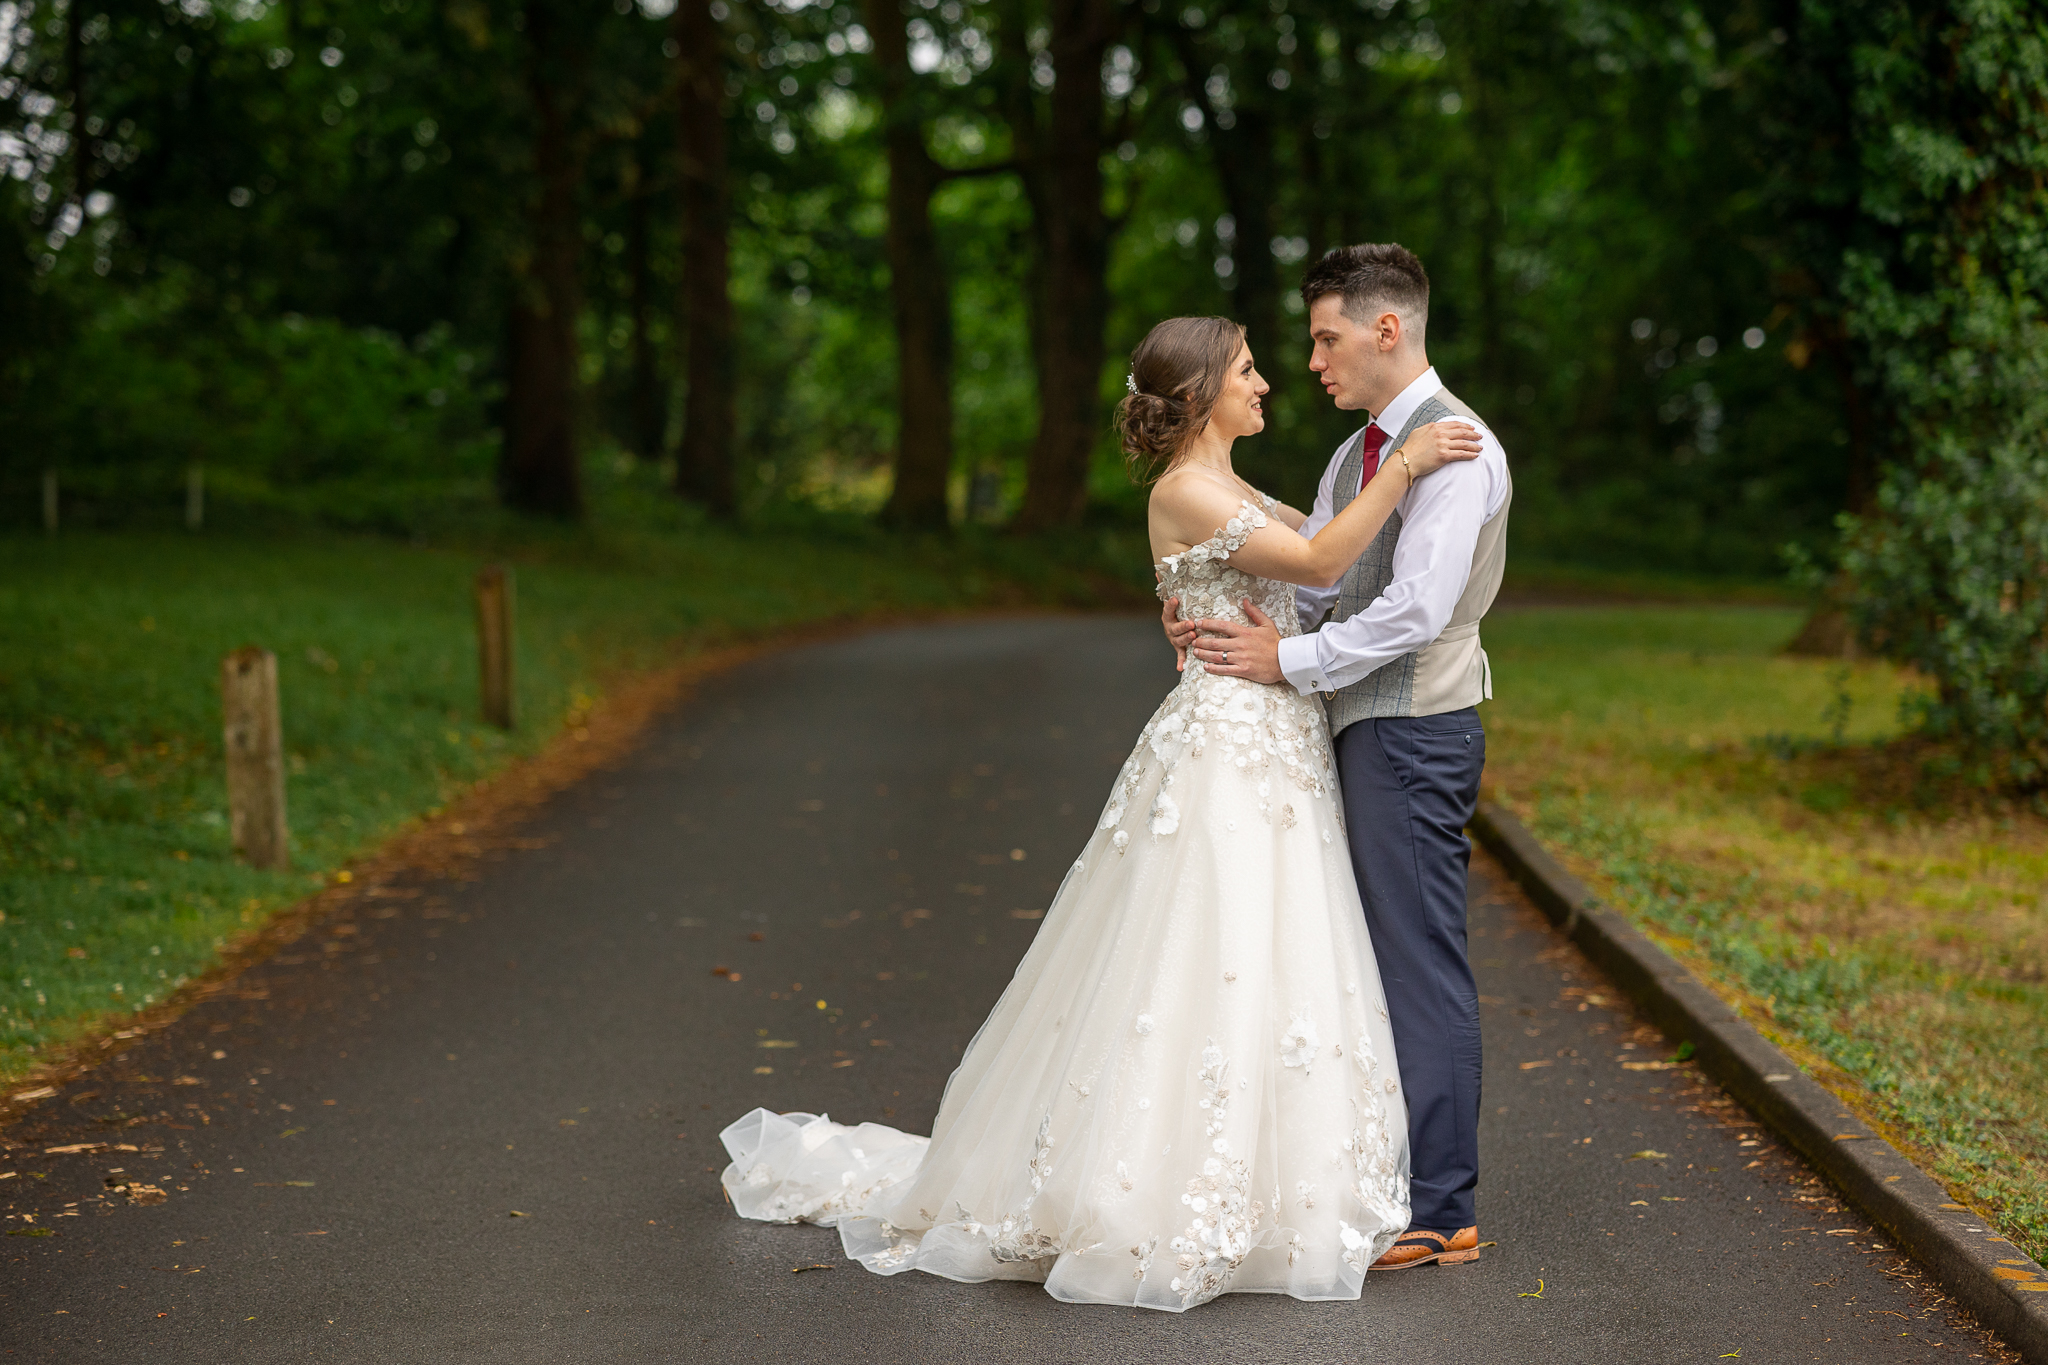 A bride and groom embracing on a path in the woods, captured by a South Wales wedding photographer.